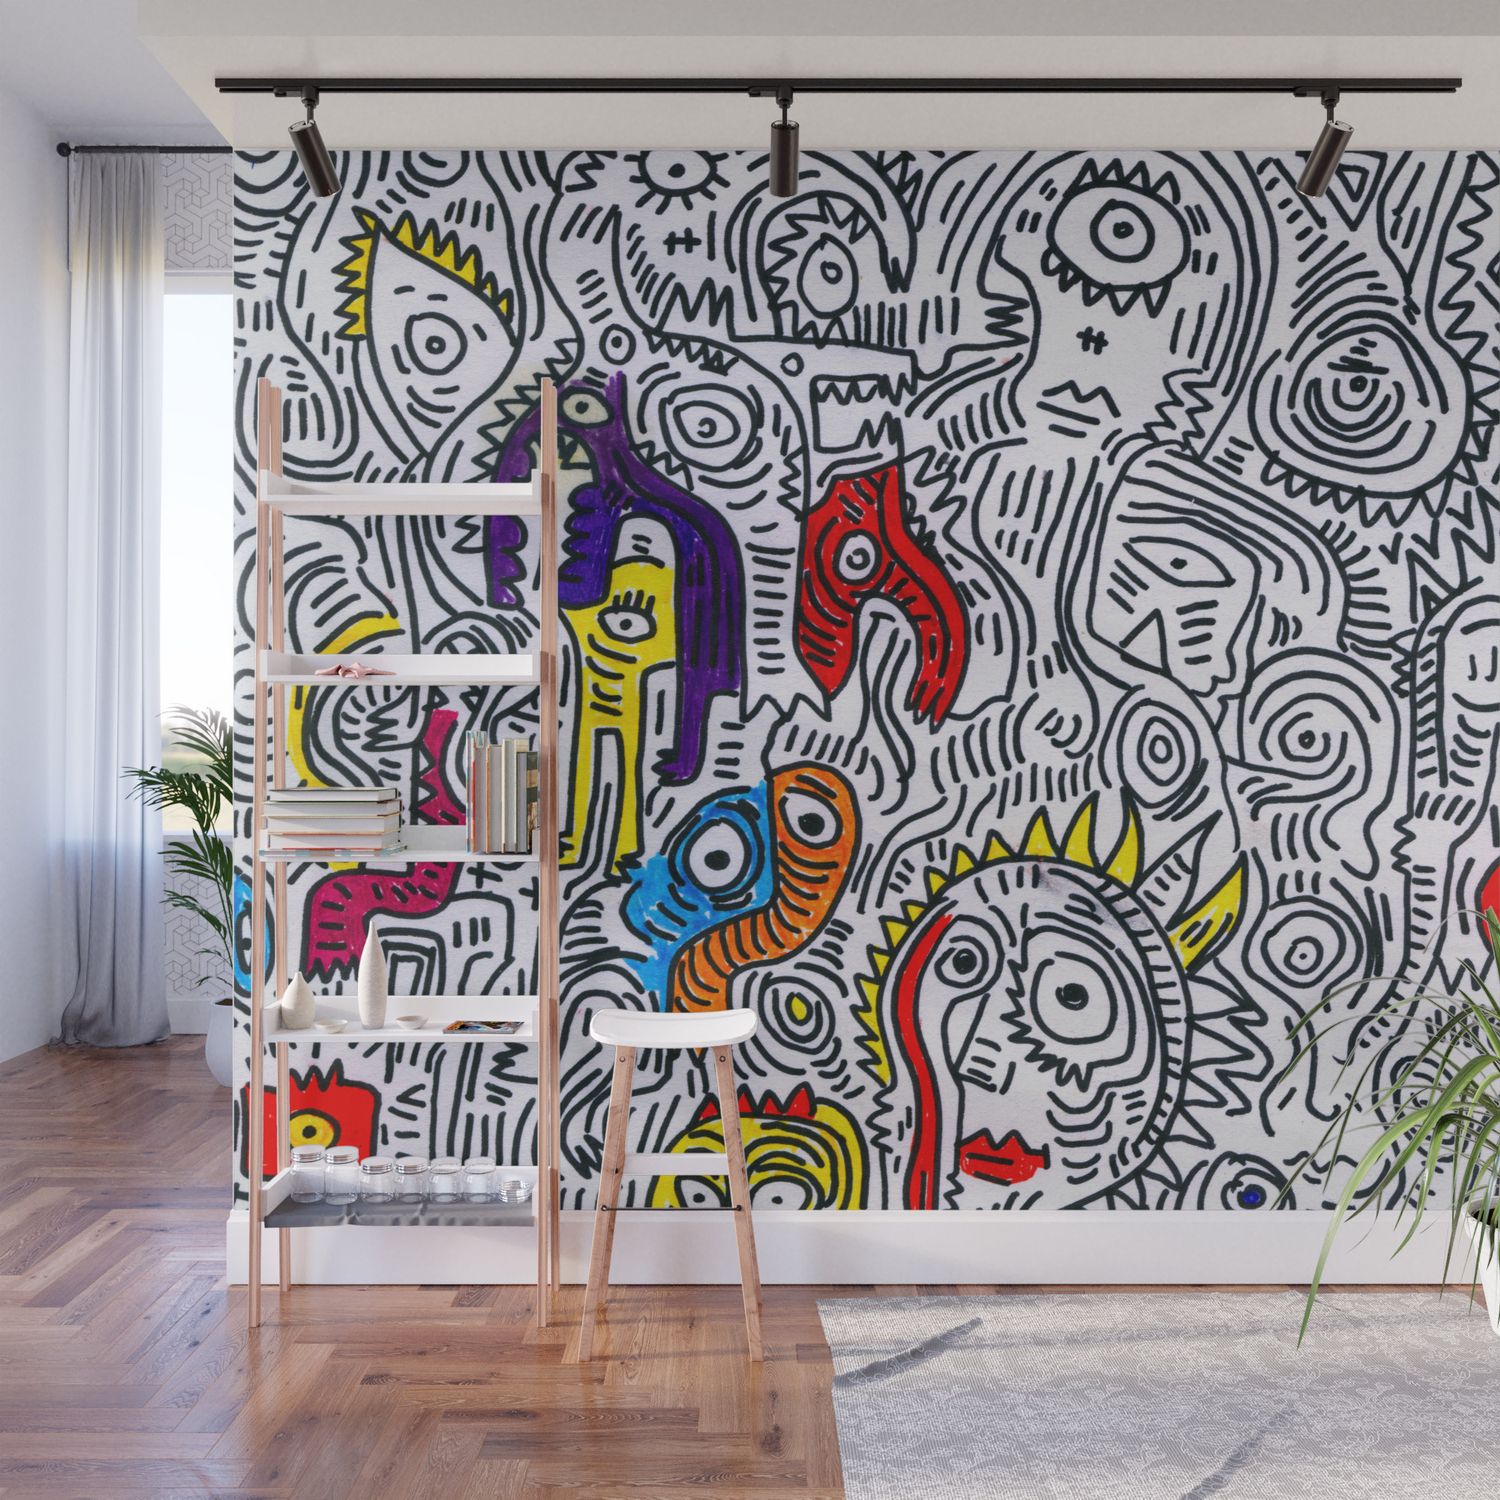 Hand Drawn Wall Art Inside Newest Pattern Doddle Hand Drawn Black And White Colors Street Art Wall Mural Emmanuel Signorino (View 13 of 15)